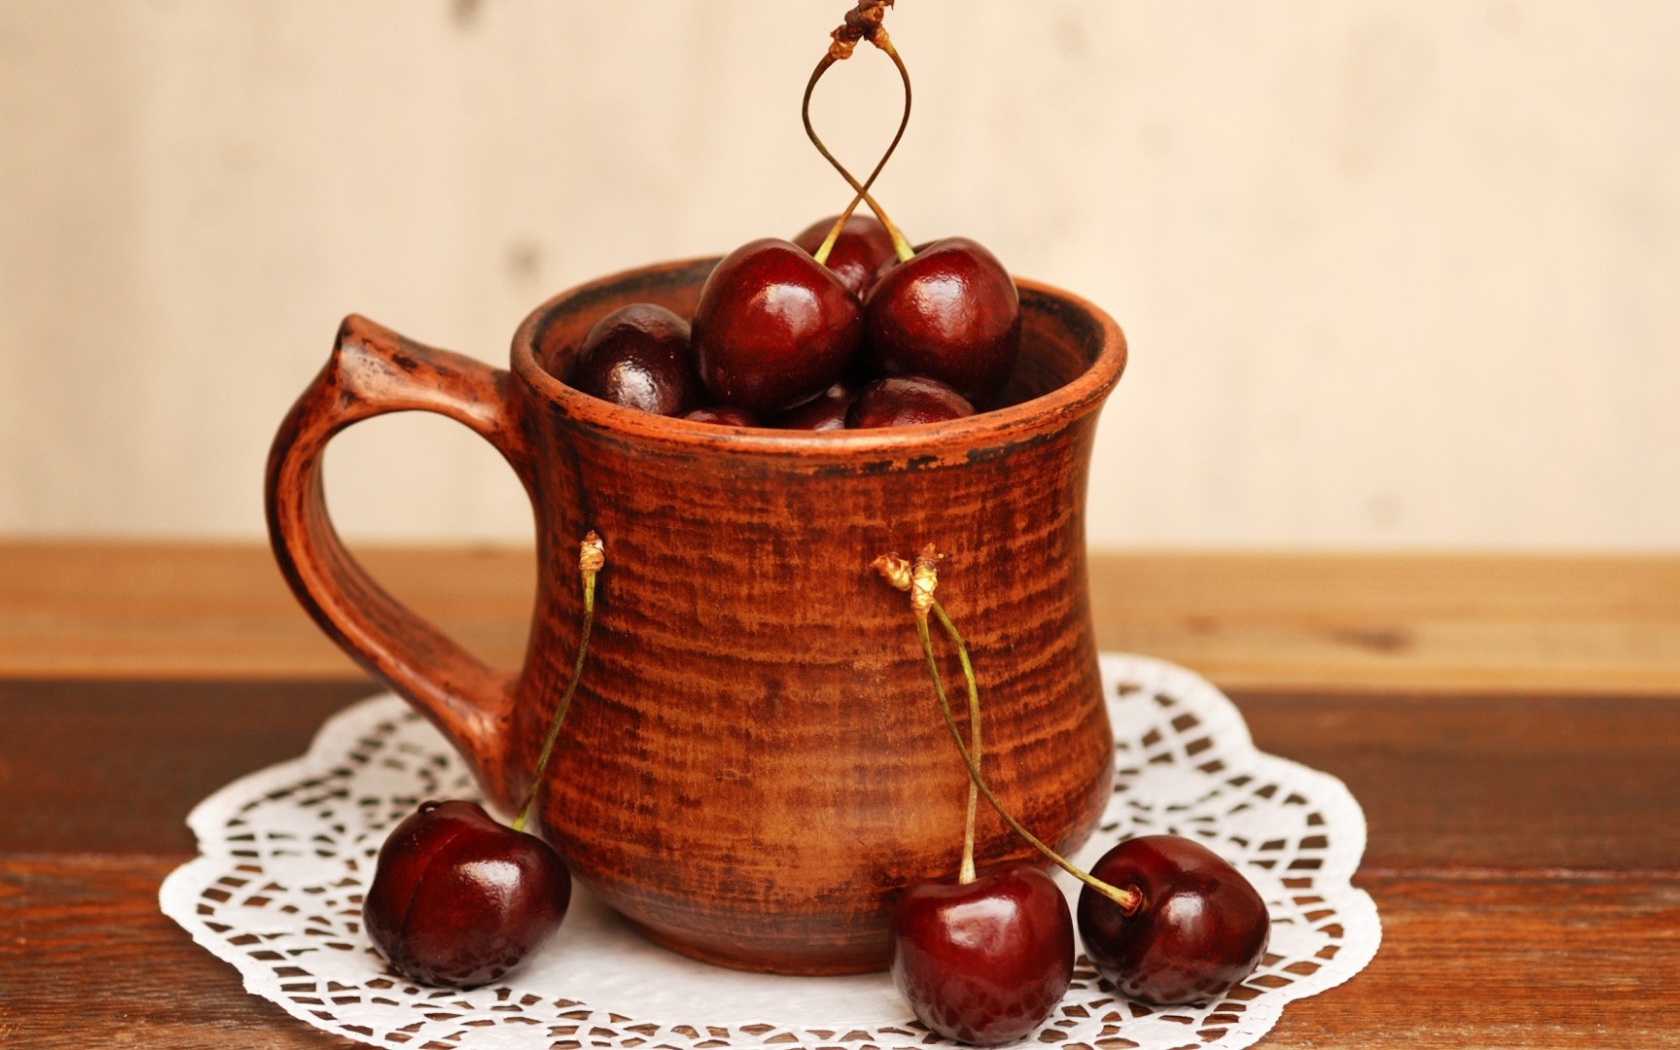 Cup with cherries